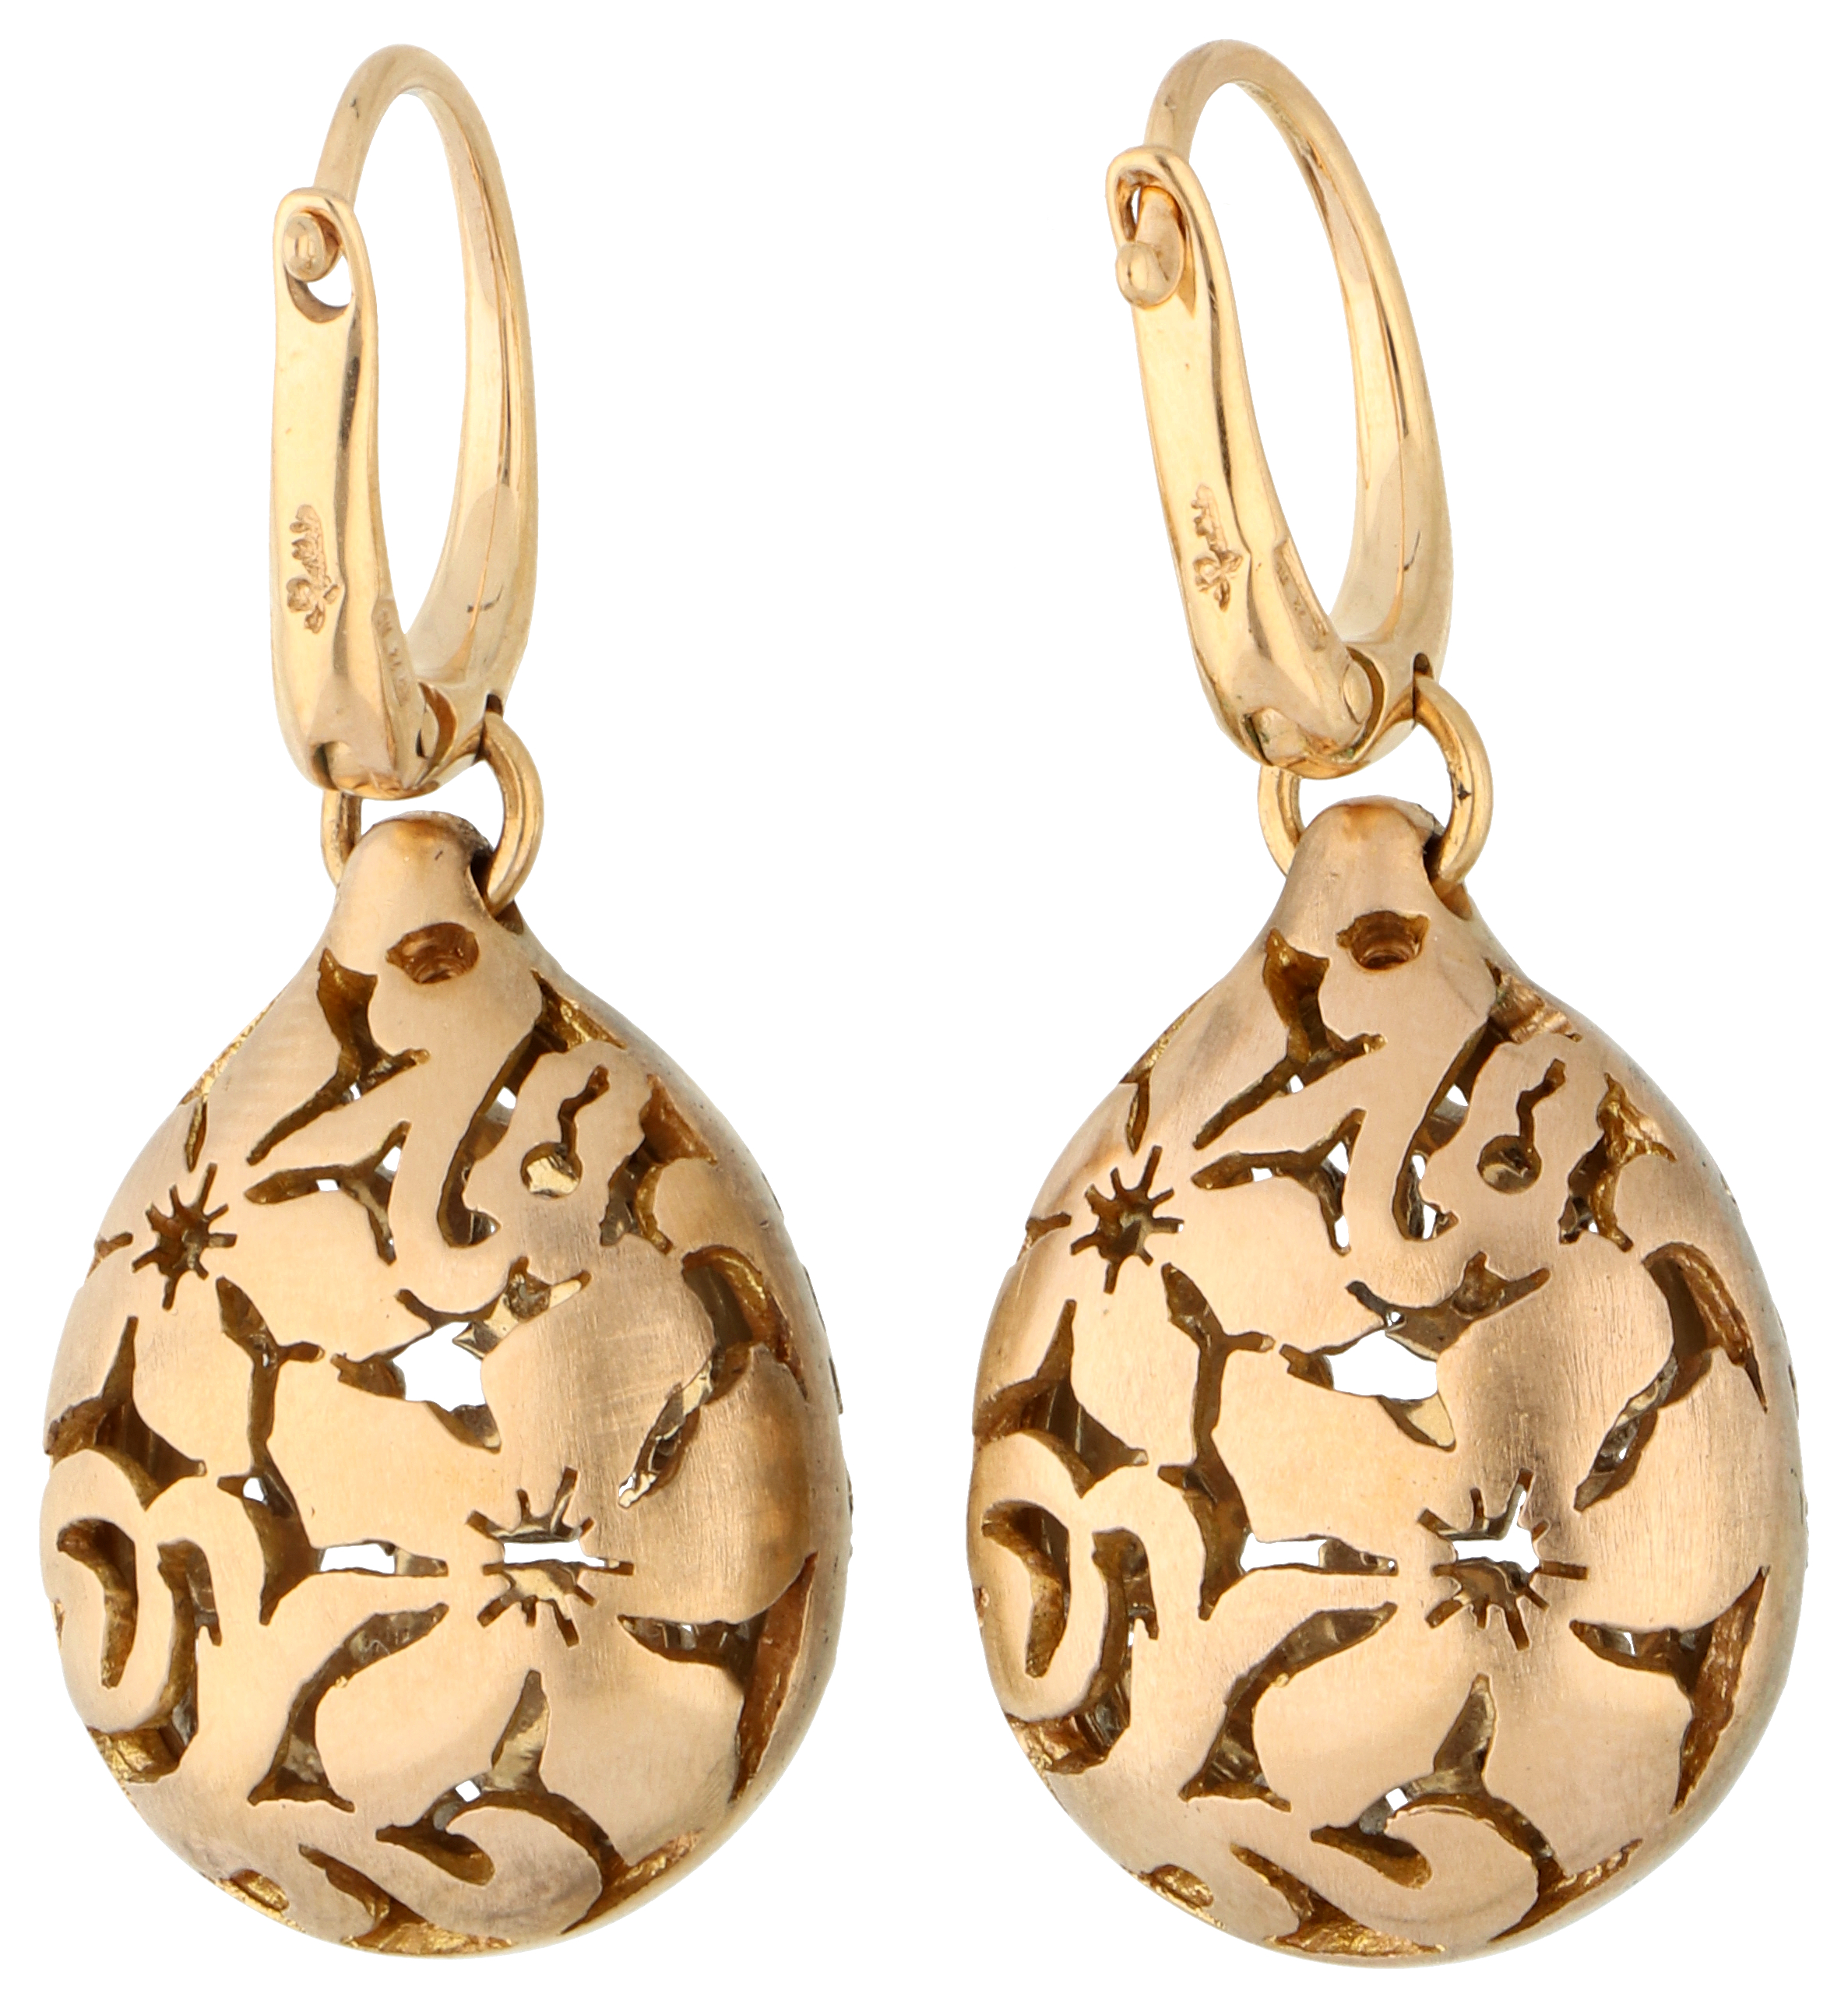 No Reserve - Pomellato 18K yellow gold Arabesque earrings with diamonds. - Image 2 of 5